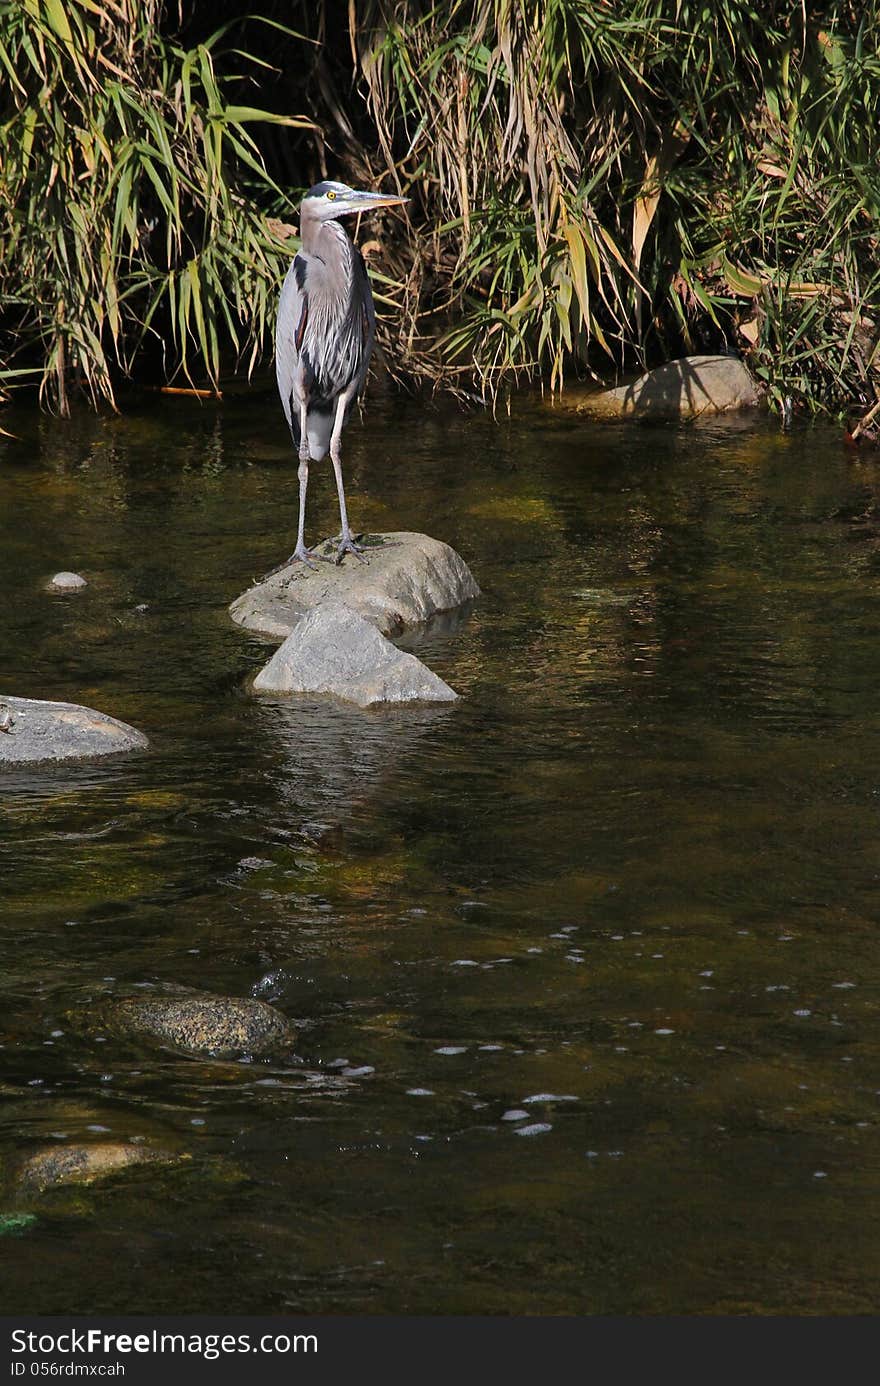 Great Blue Heron Standing On Rock In River